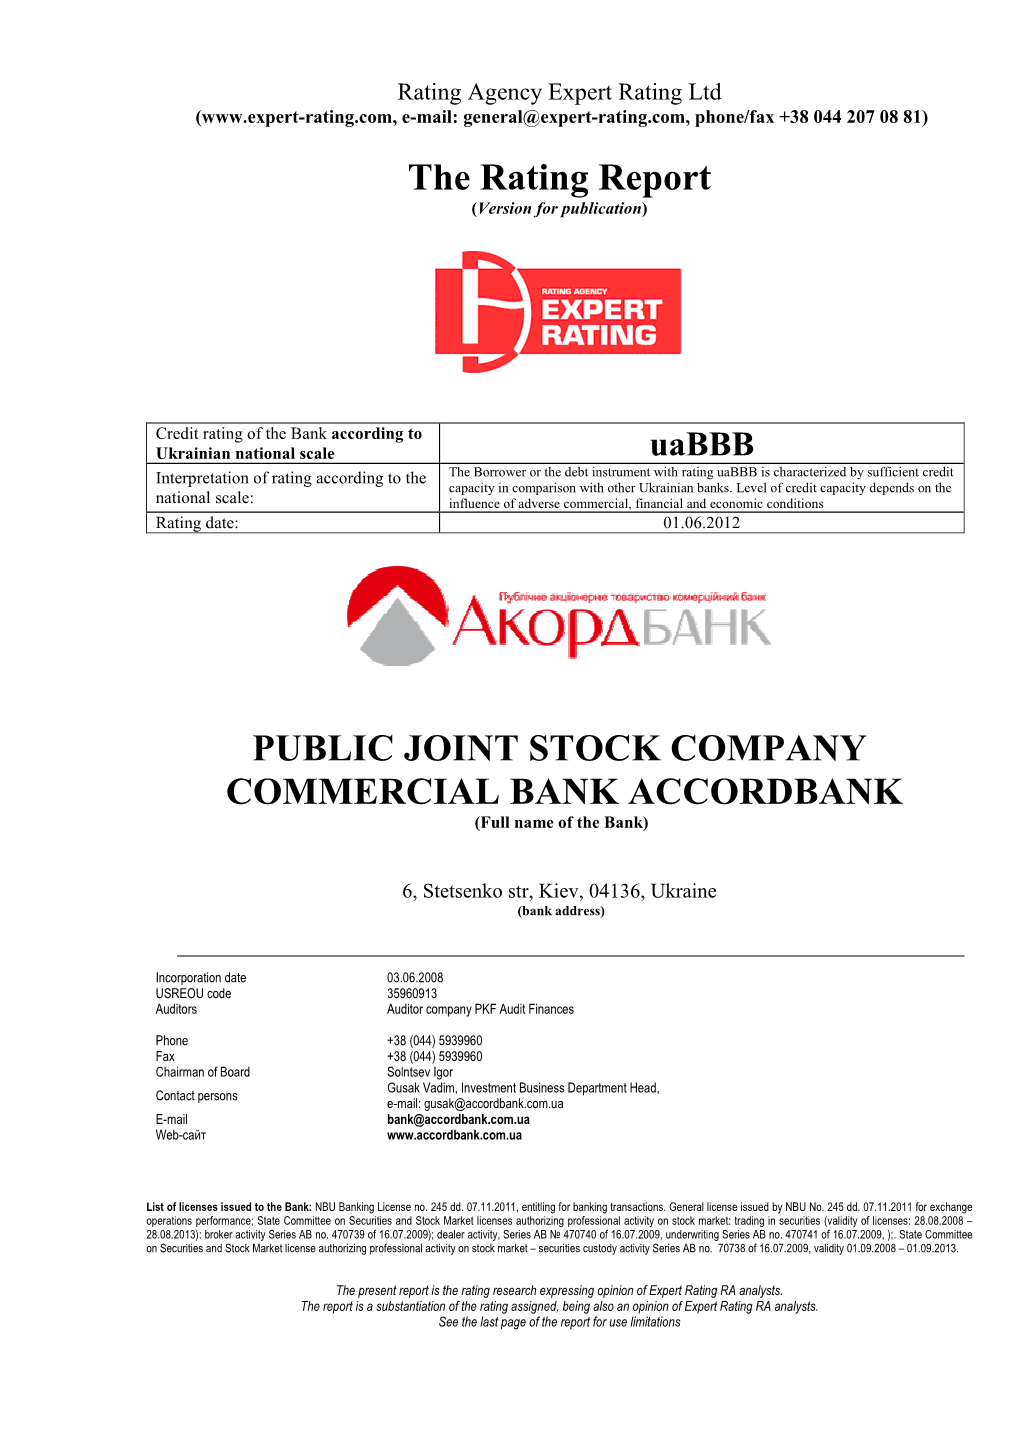 The Rating Report PUBLIC JOINT STOCK COMPANY COMMERCIAL